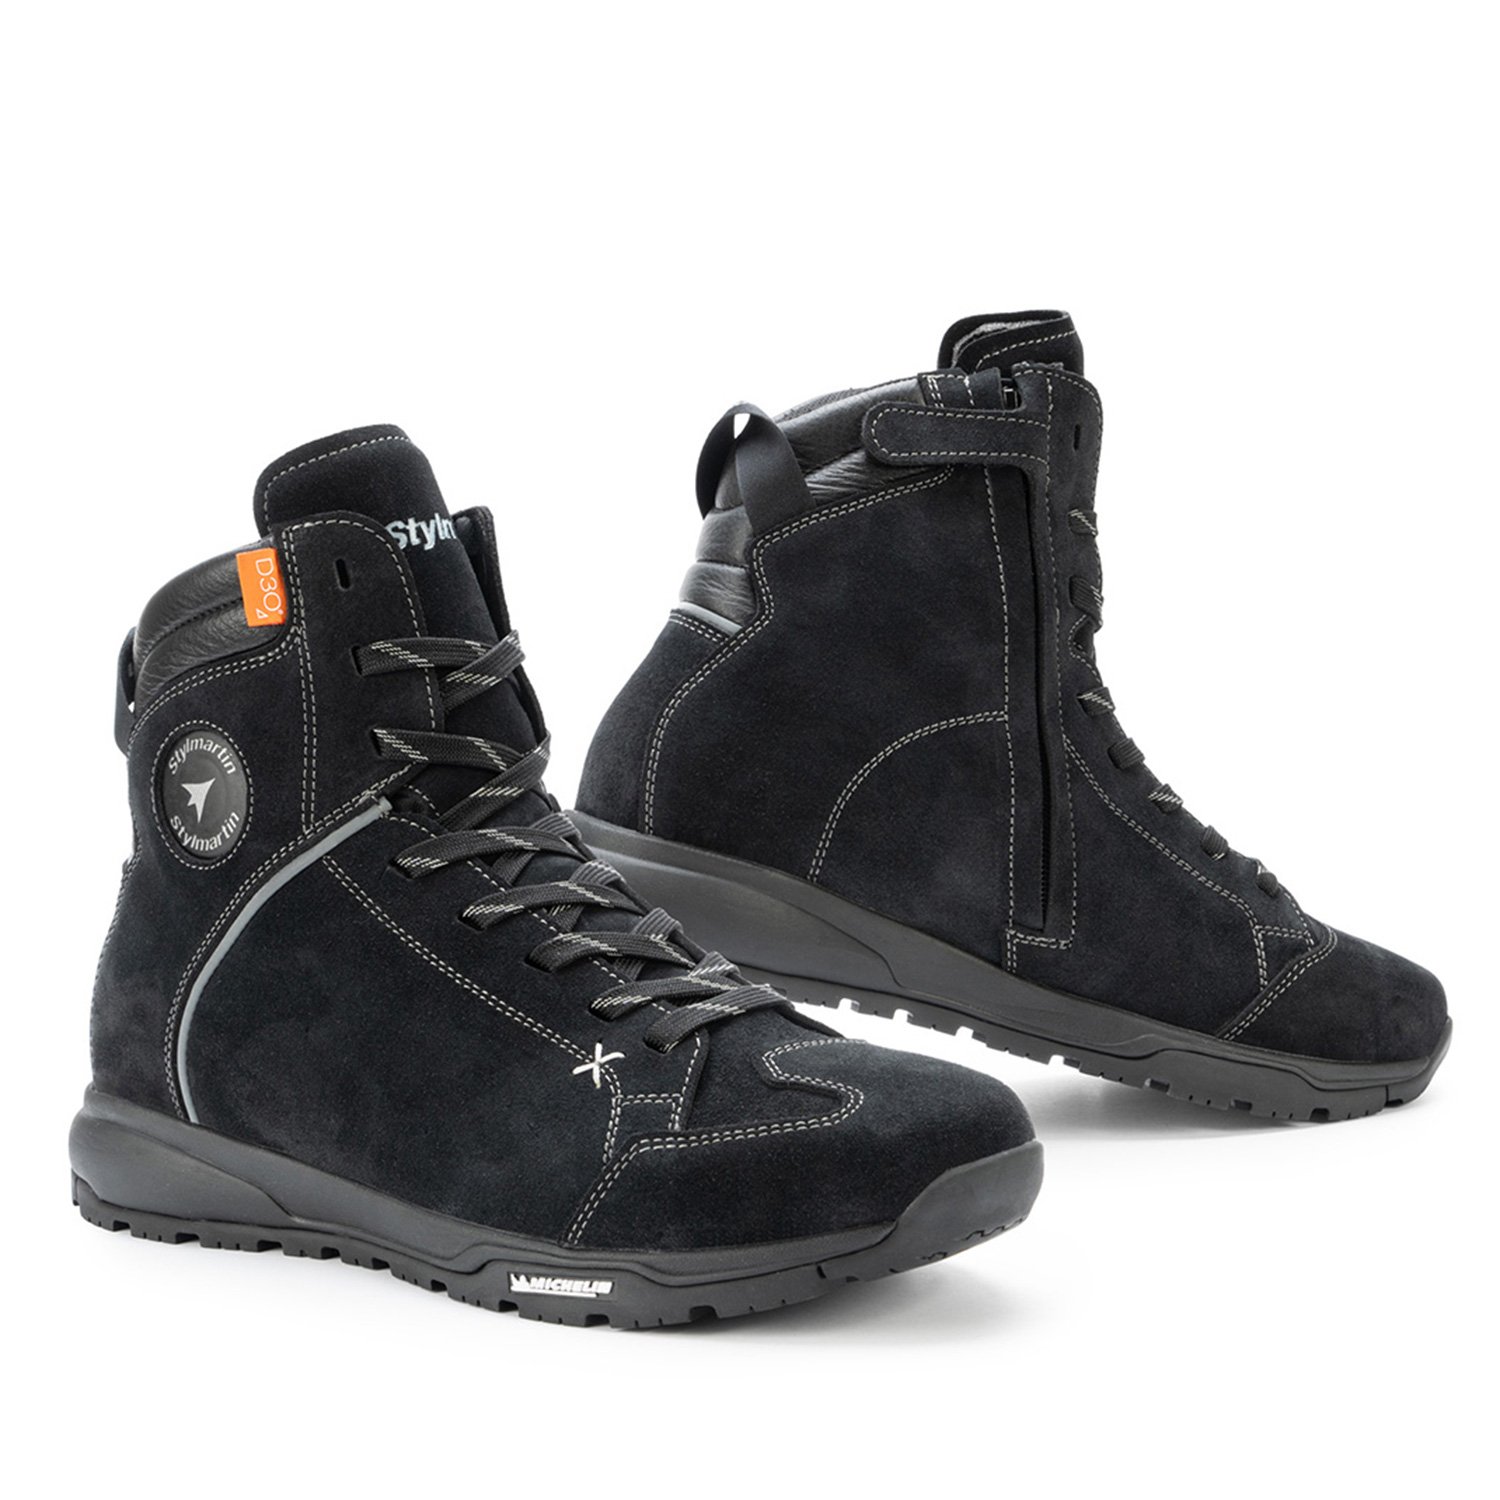 Image of Stylmartin Zed WP Sneakers Black Size 43 ID 1000001362458